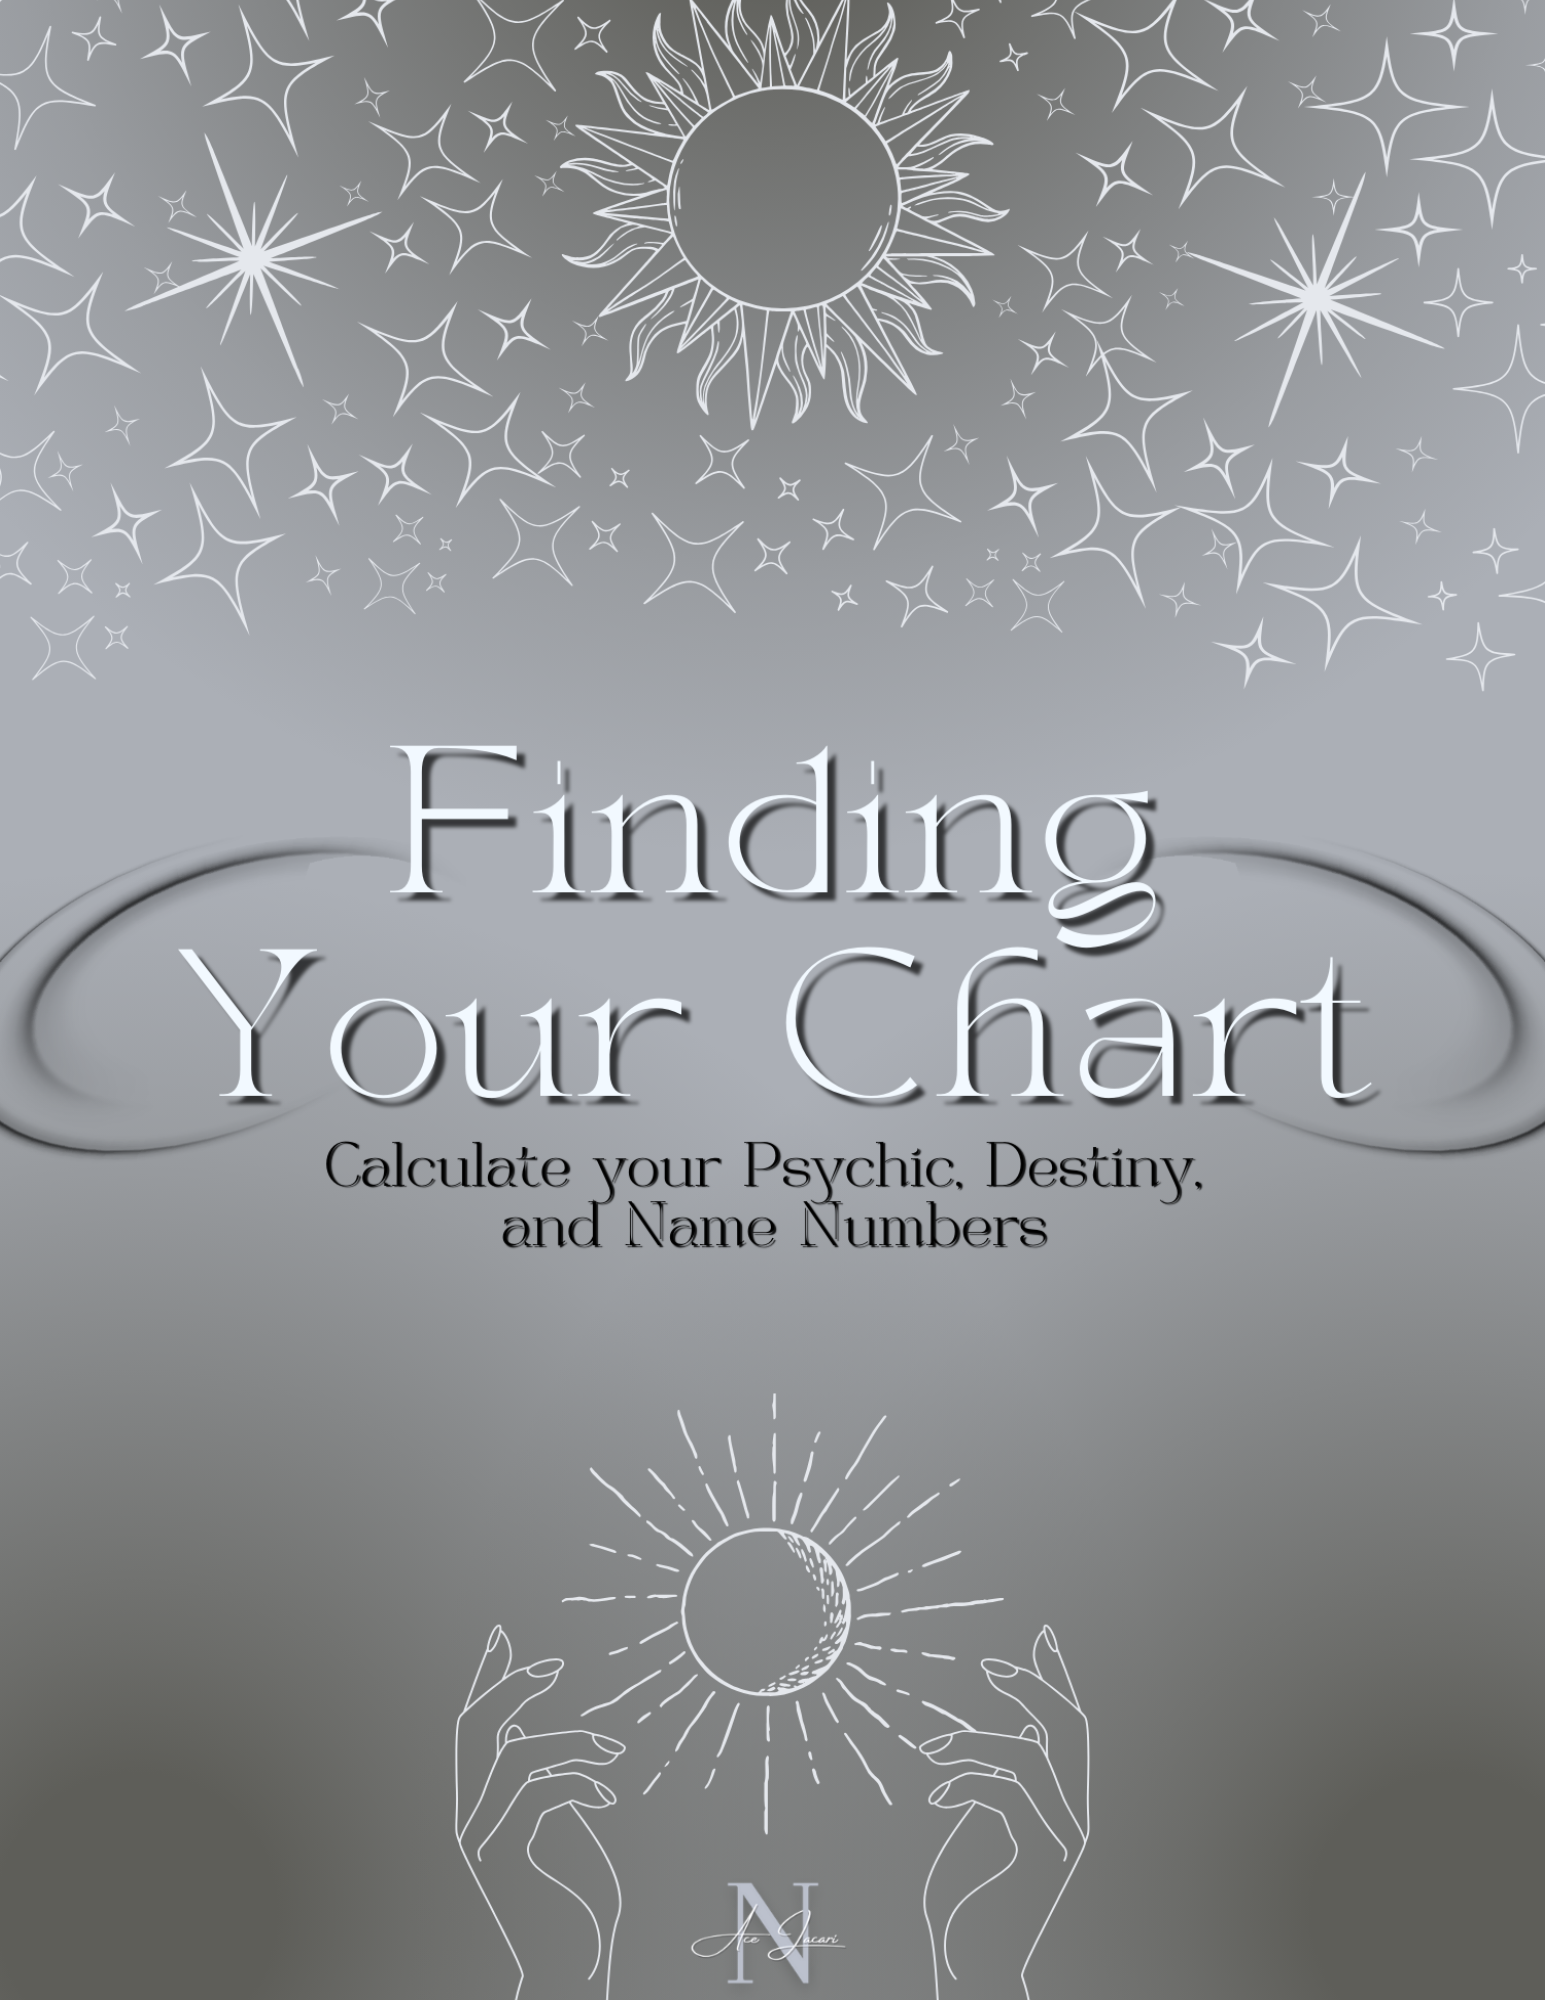 Free Finding Your Chart Guide thumbnail